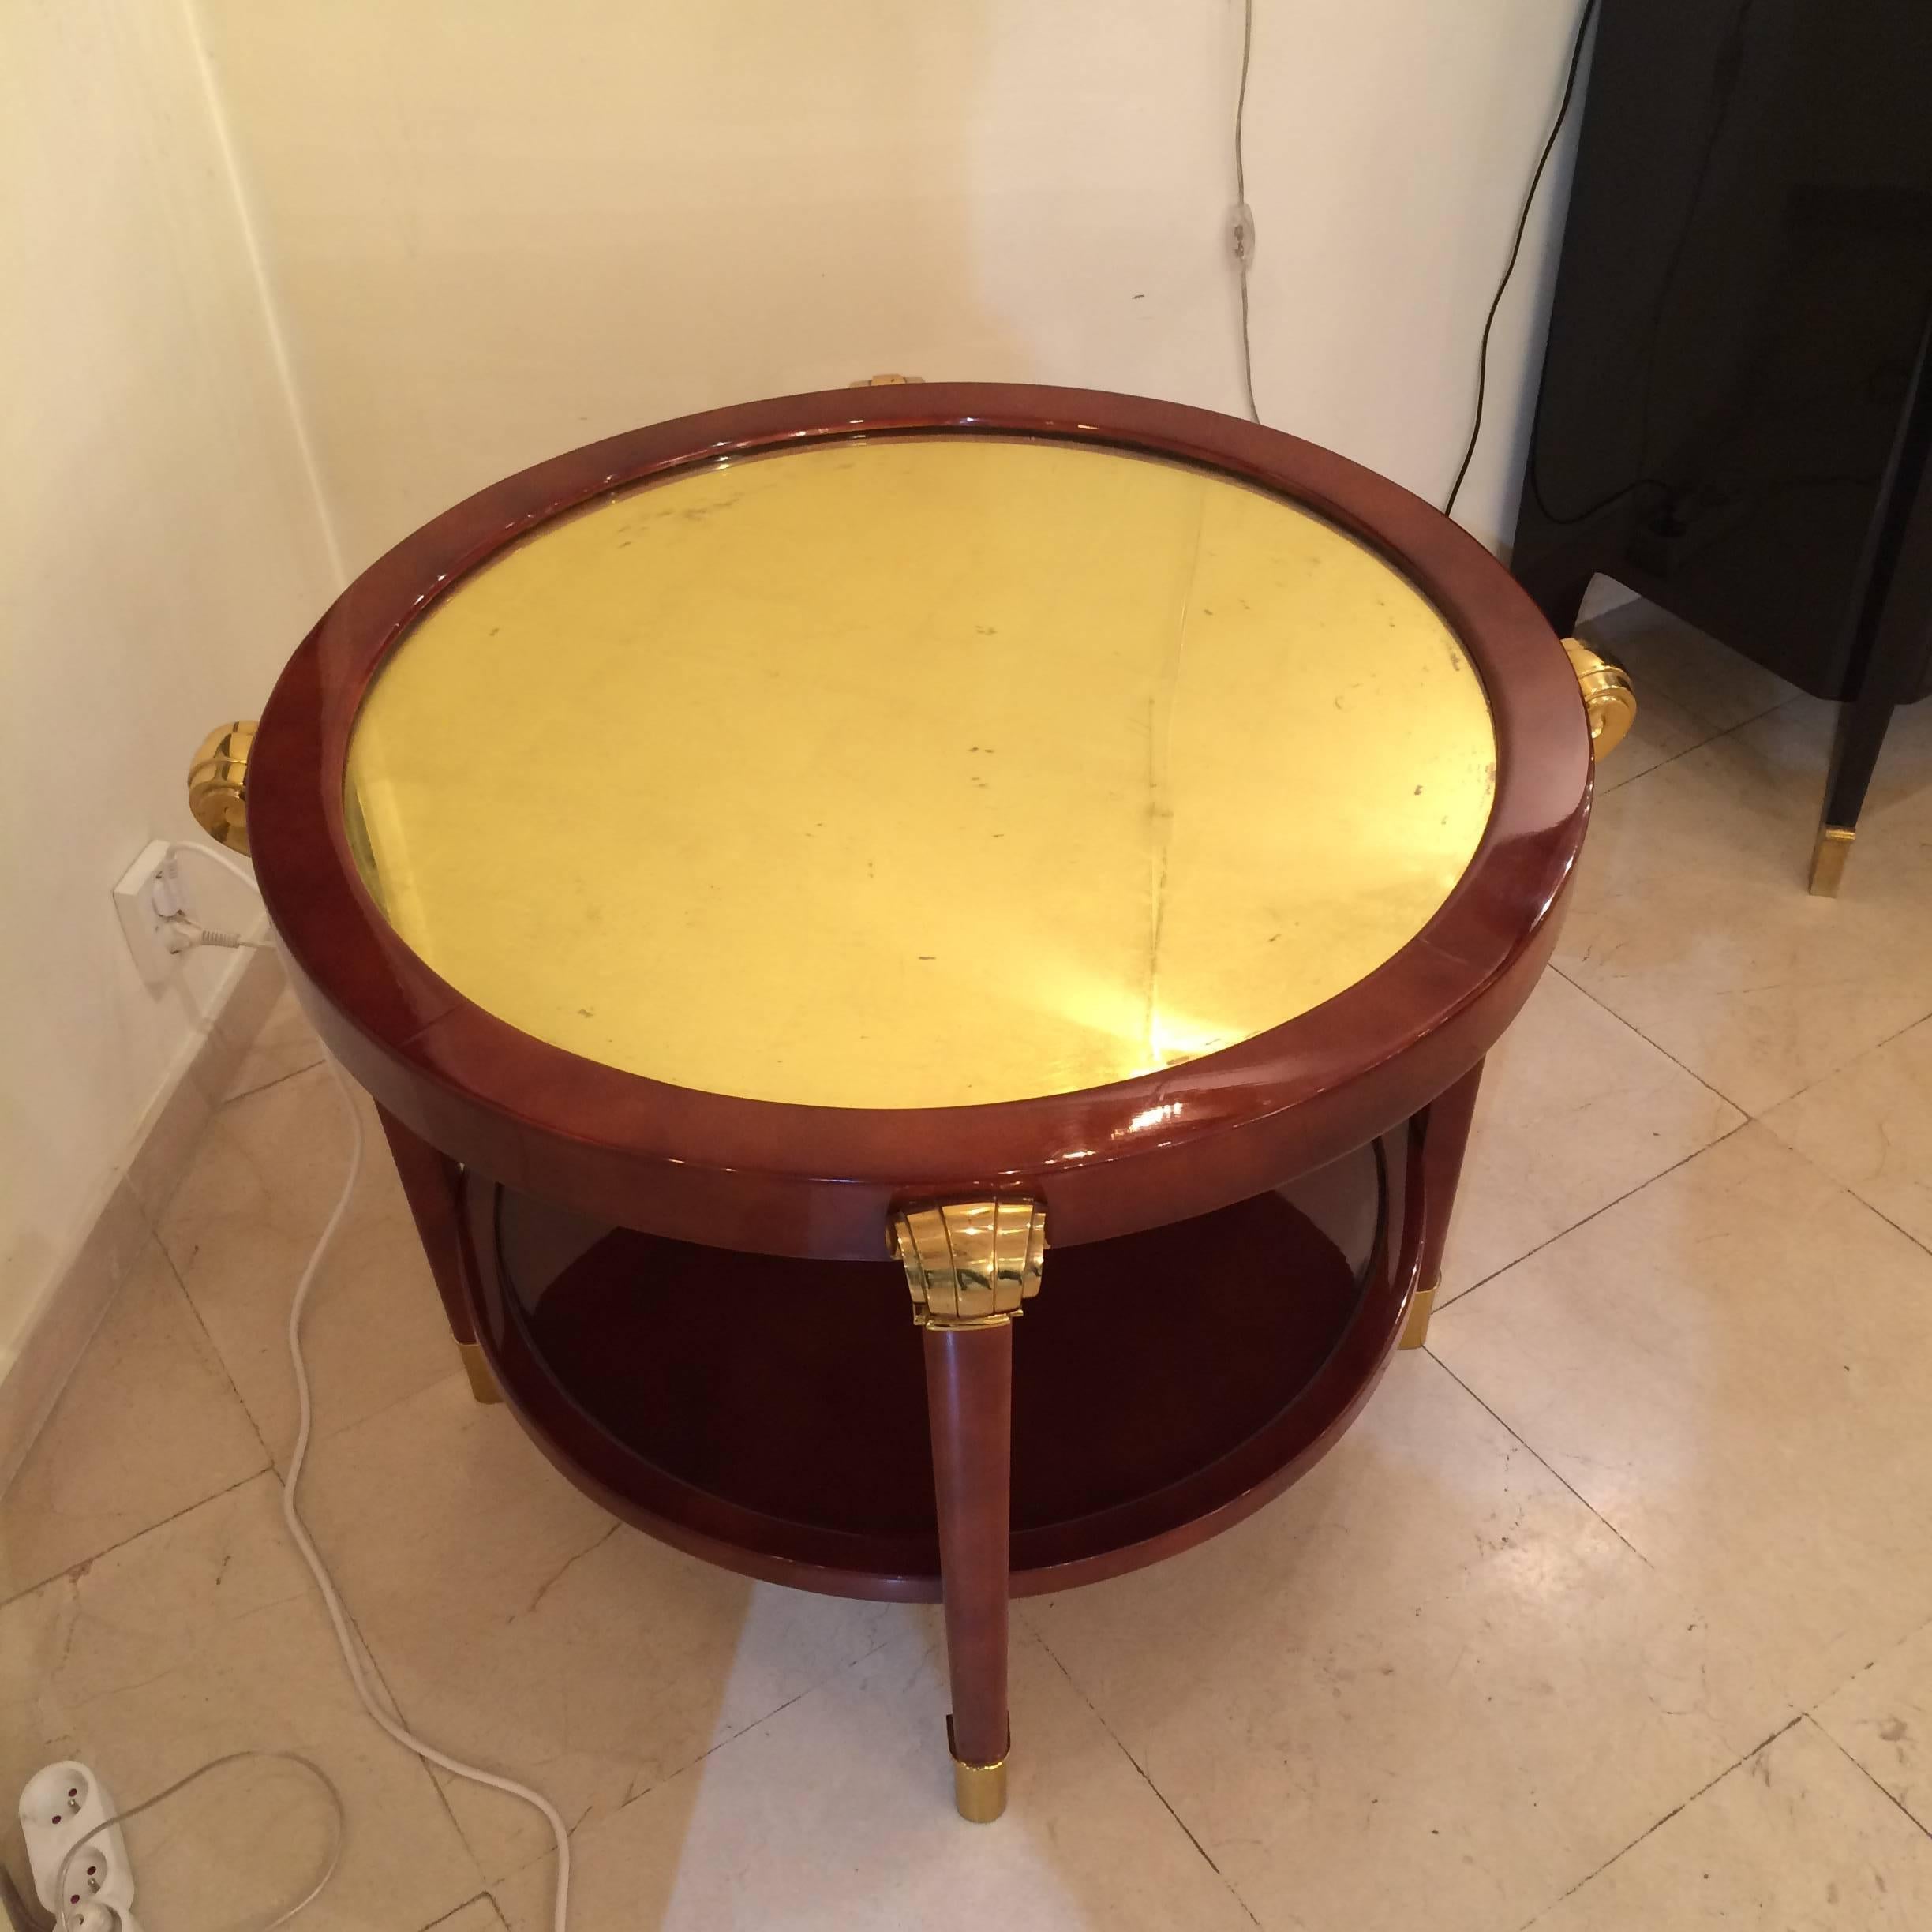 Very chic Art Deco table in light brown lacquer, 
the top is in gold leaf mirror.
Big decorative elements in massive bronze.